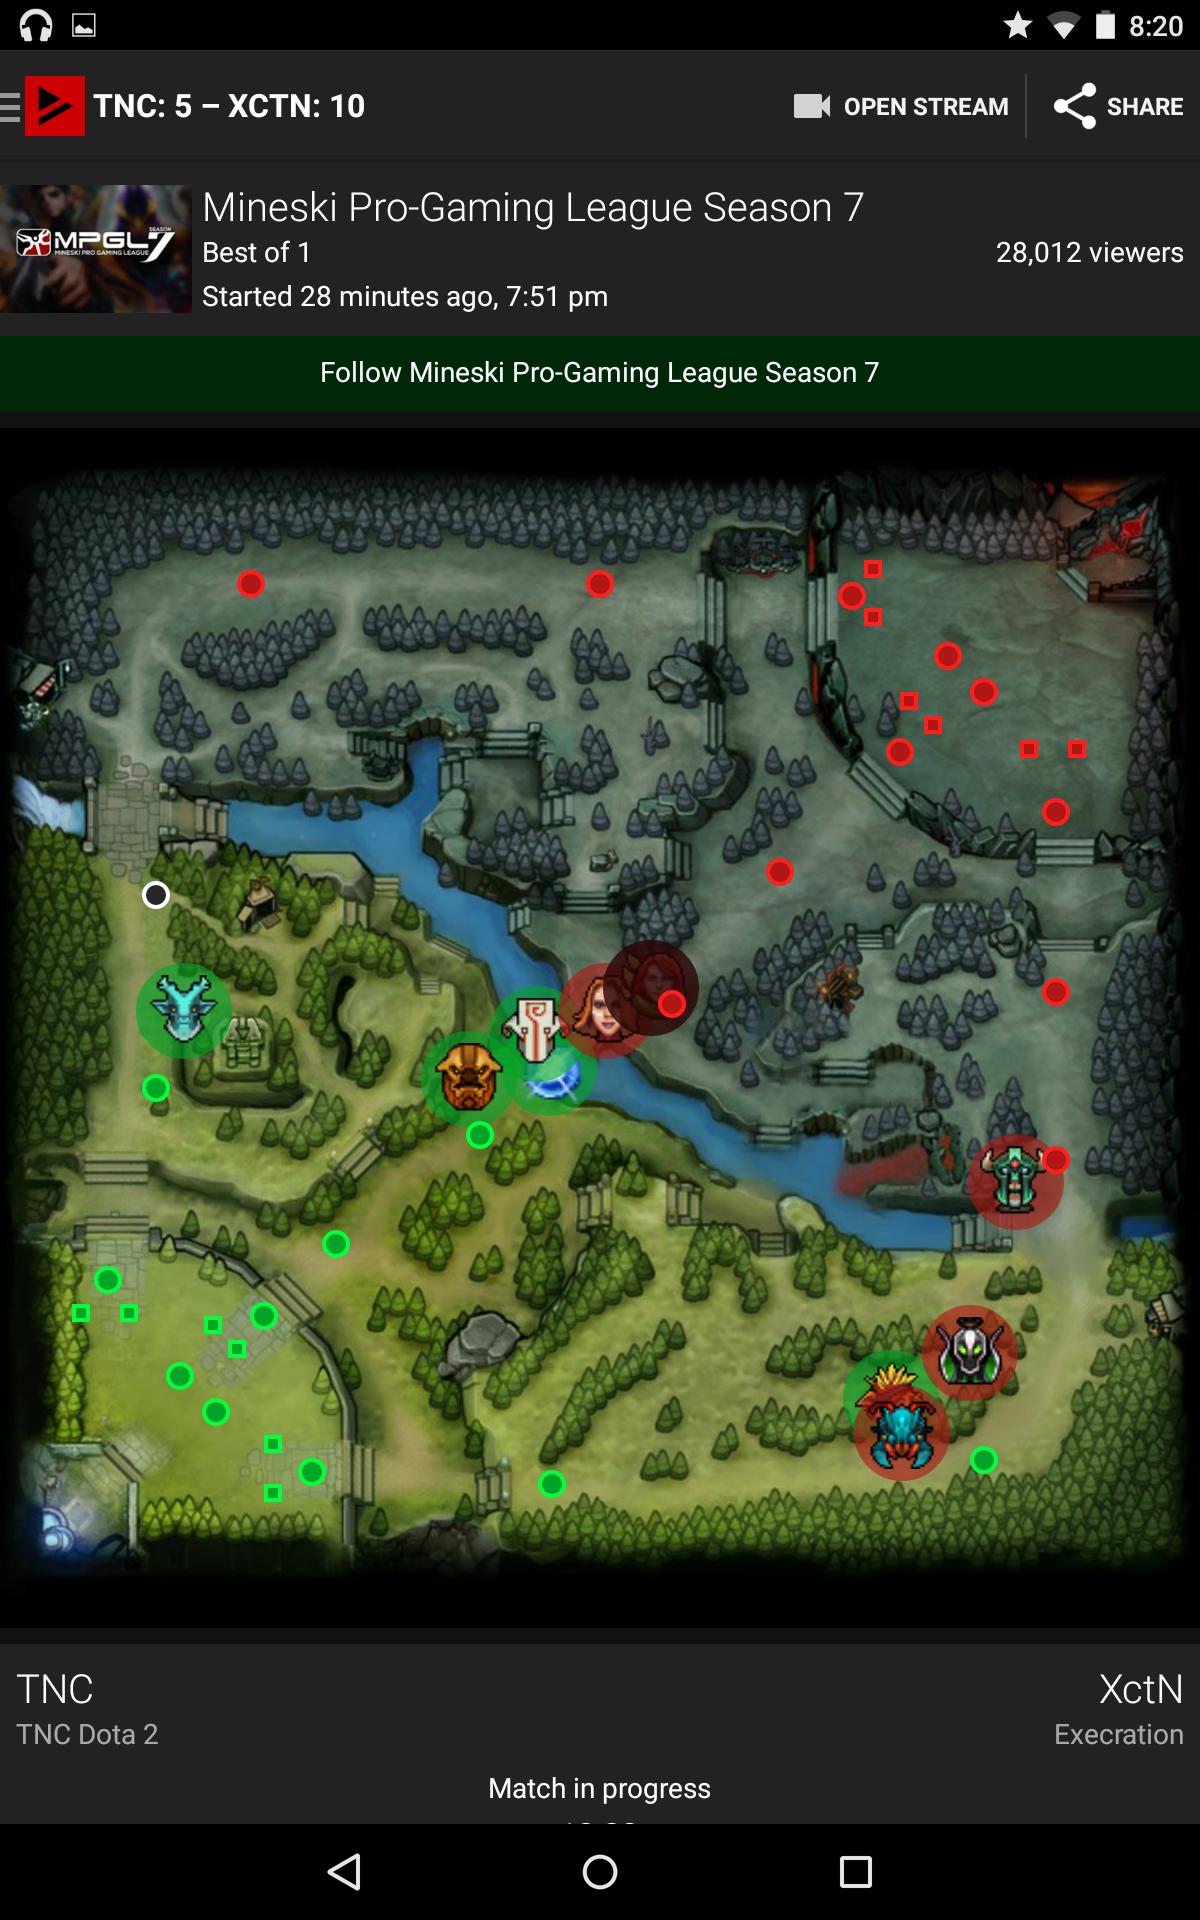 TrackDota for Android - APK Download